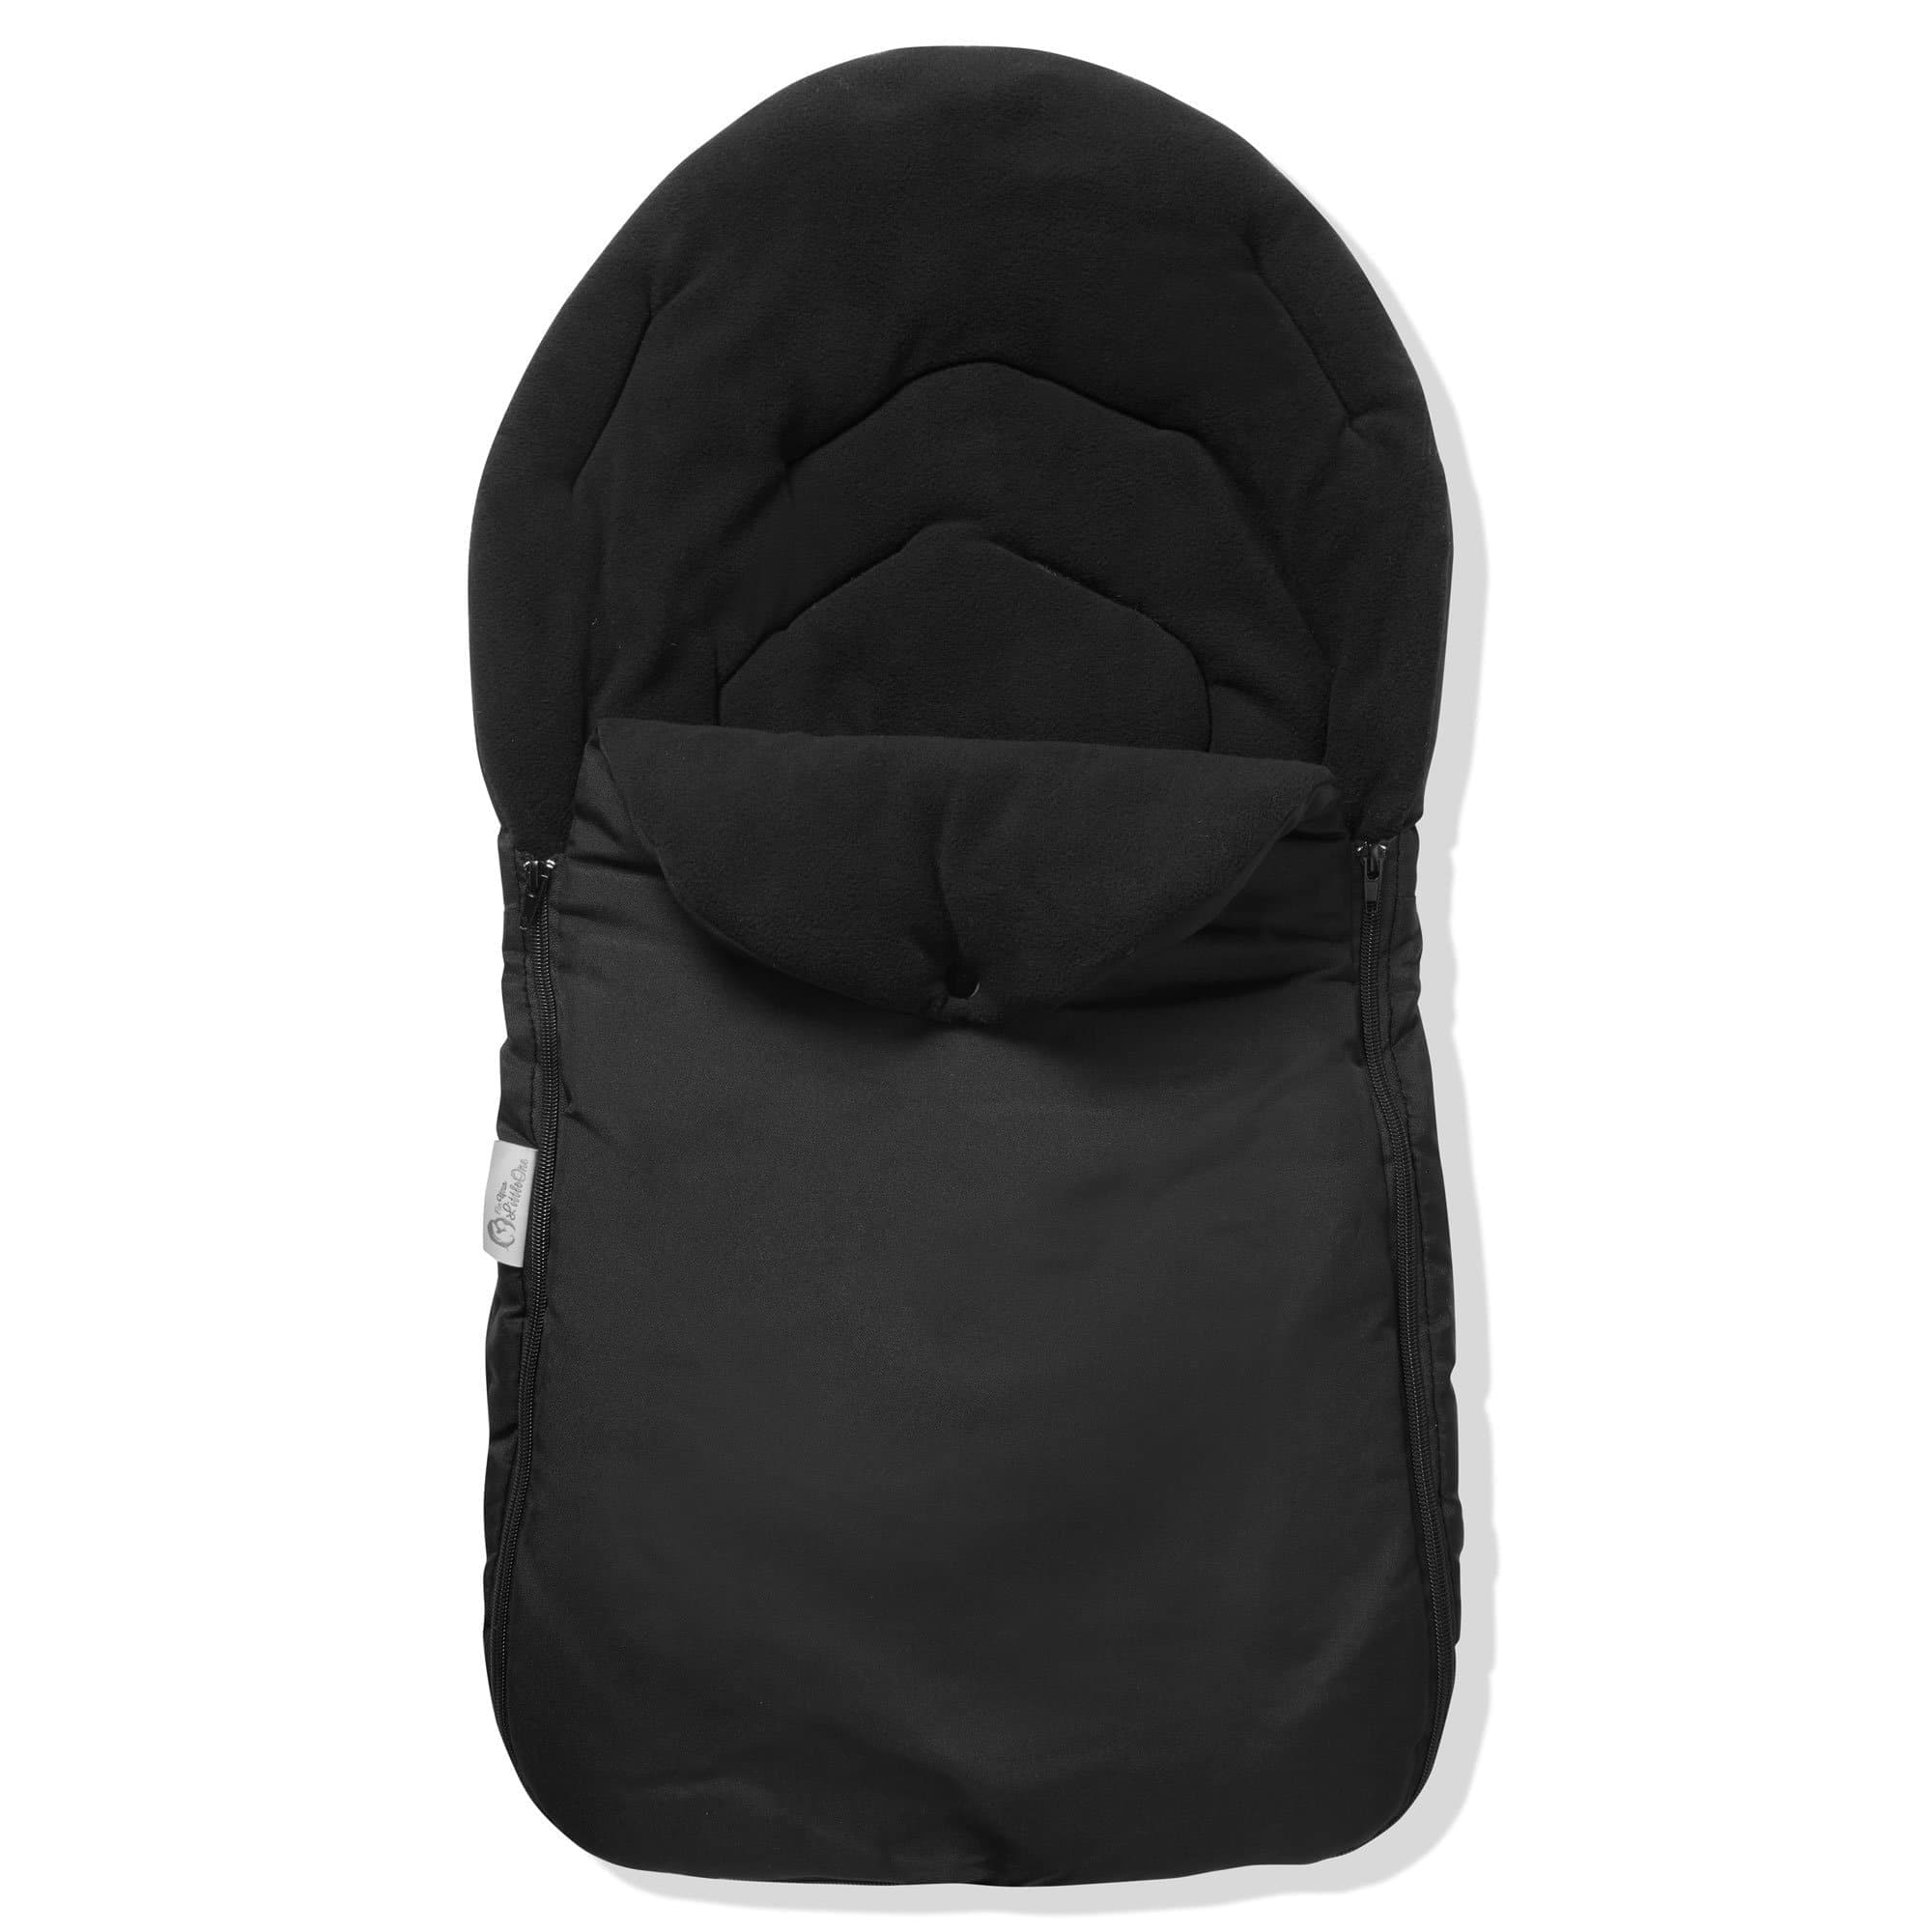 Car Seat Footmuff / Cosy Toes Compatible With Egg - Black / Fits All Models | For Your Little One